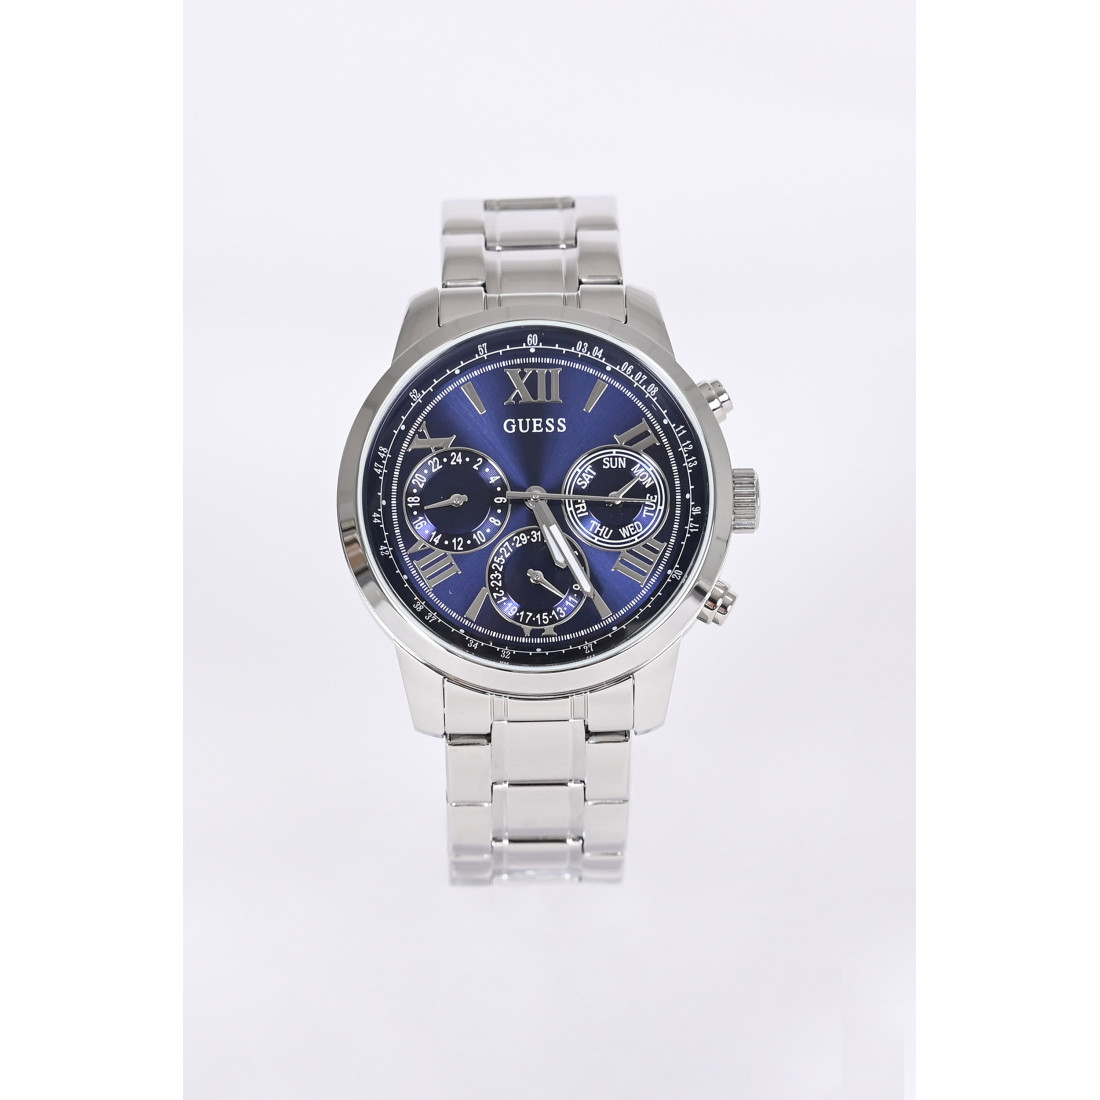 Montre homme guess w0379g3